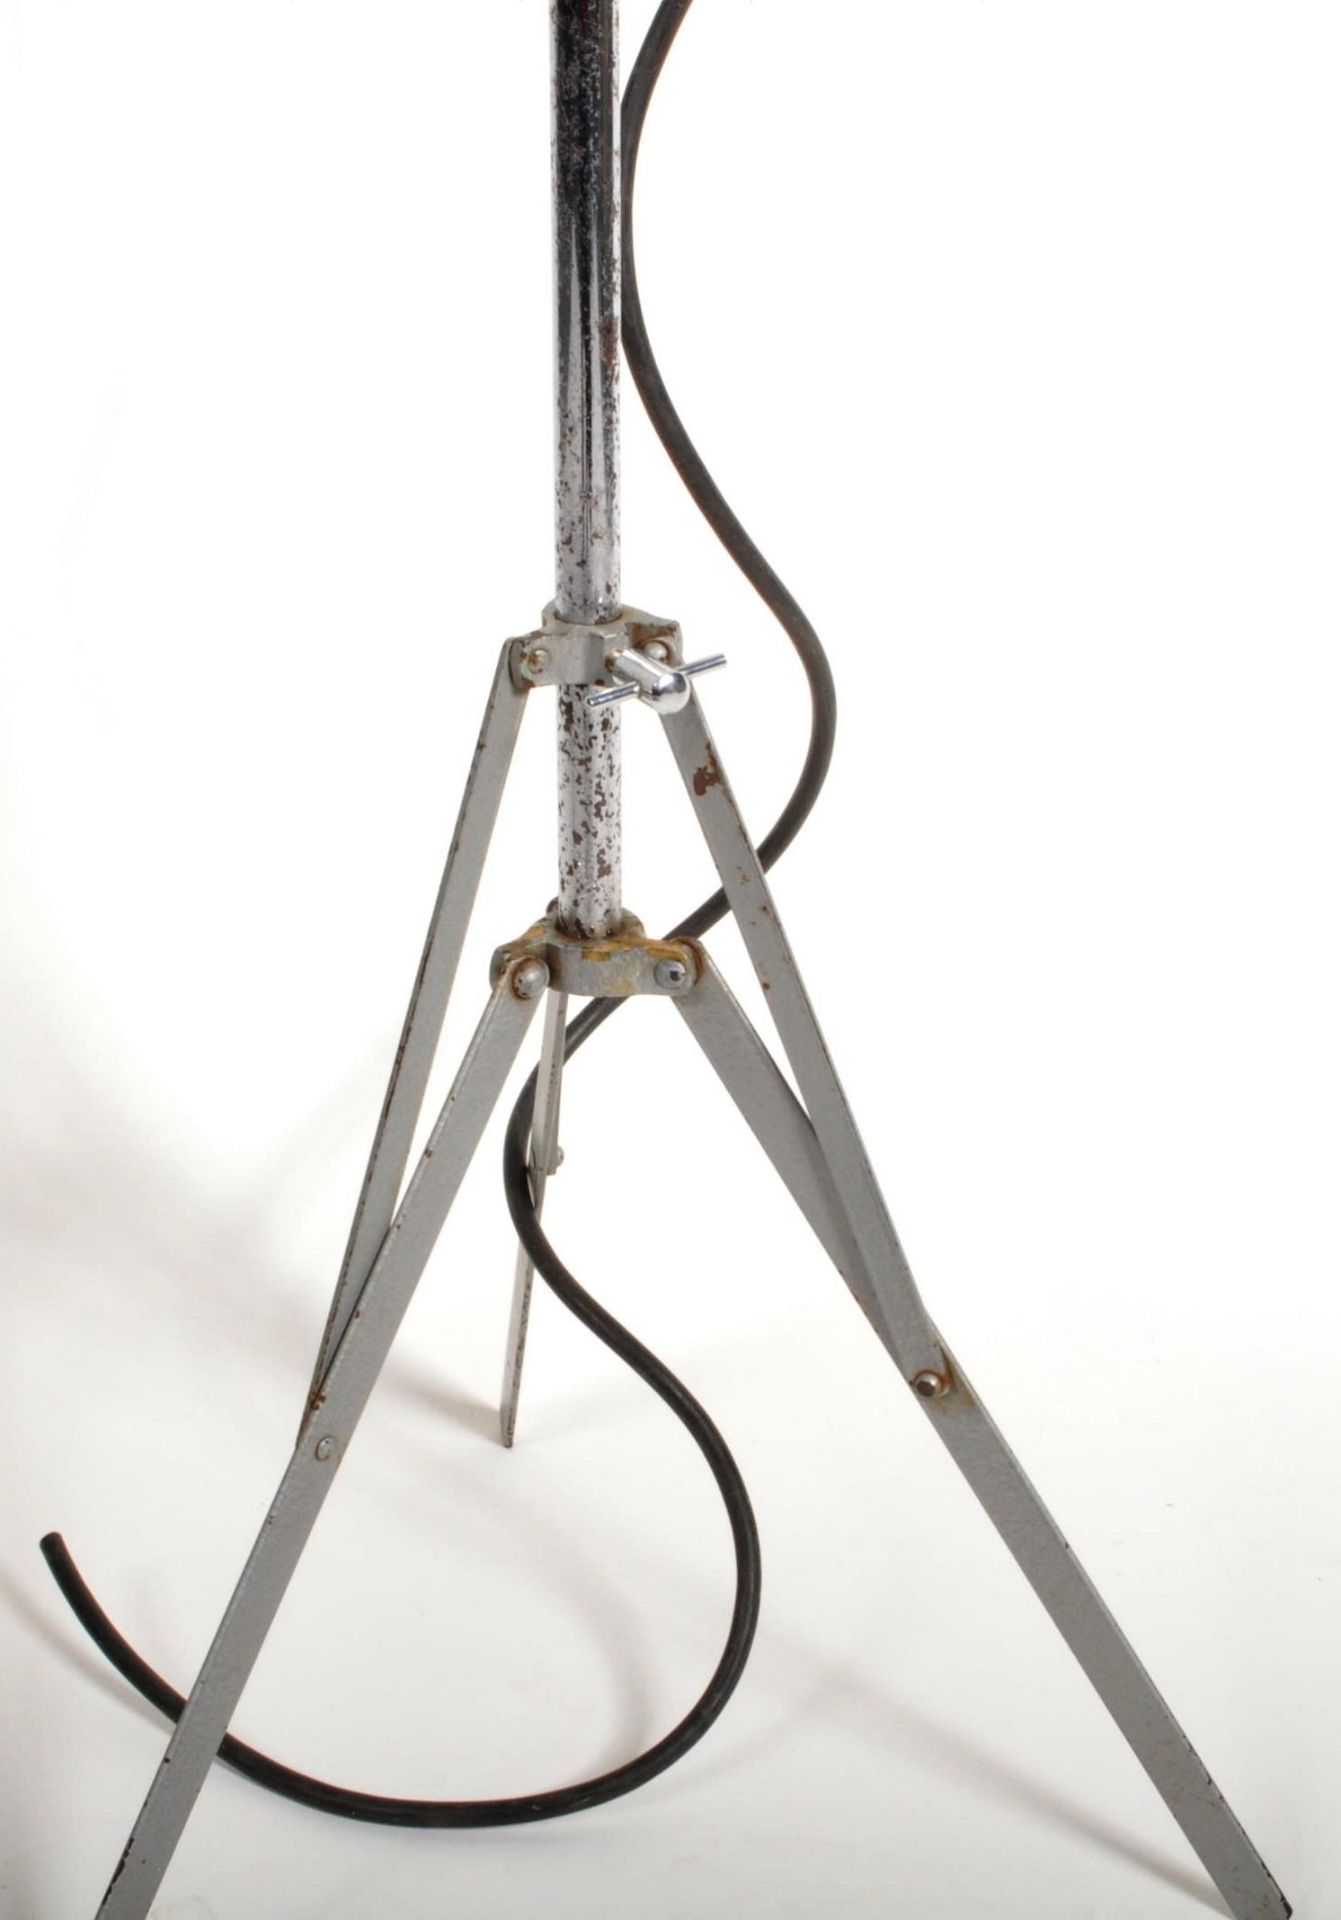 ELECTRO MEDICAL SUPPLIES 1950S THEATRE LAMP LIGHT - Image 5 of 6